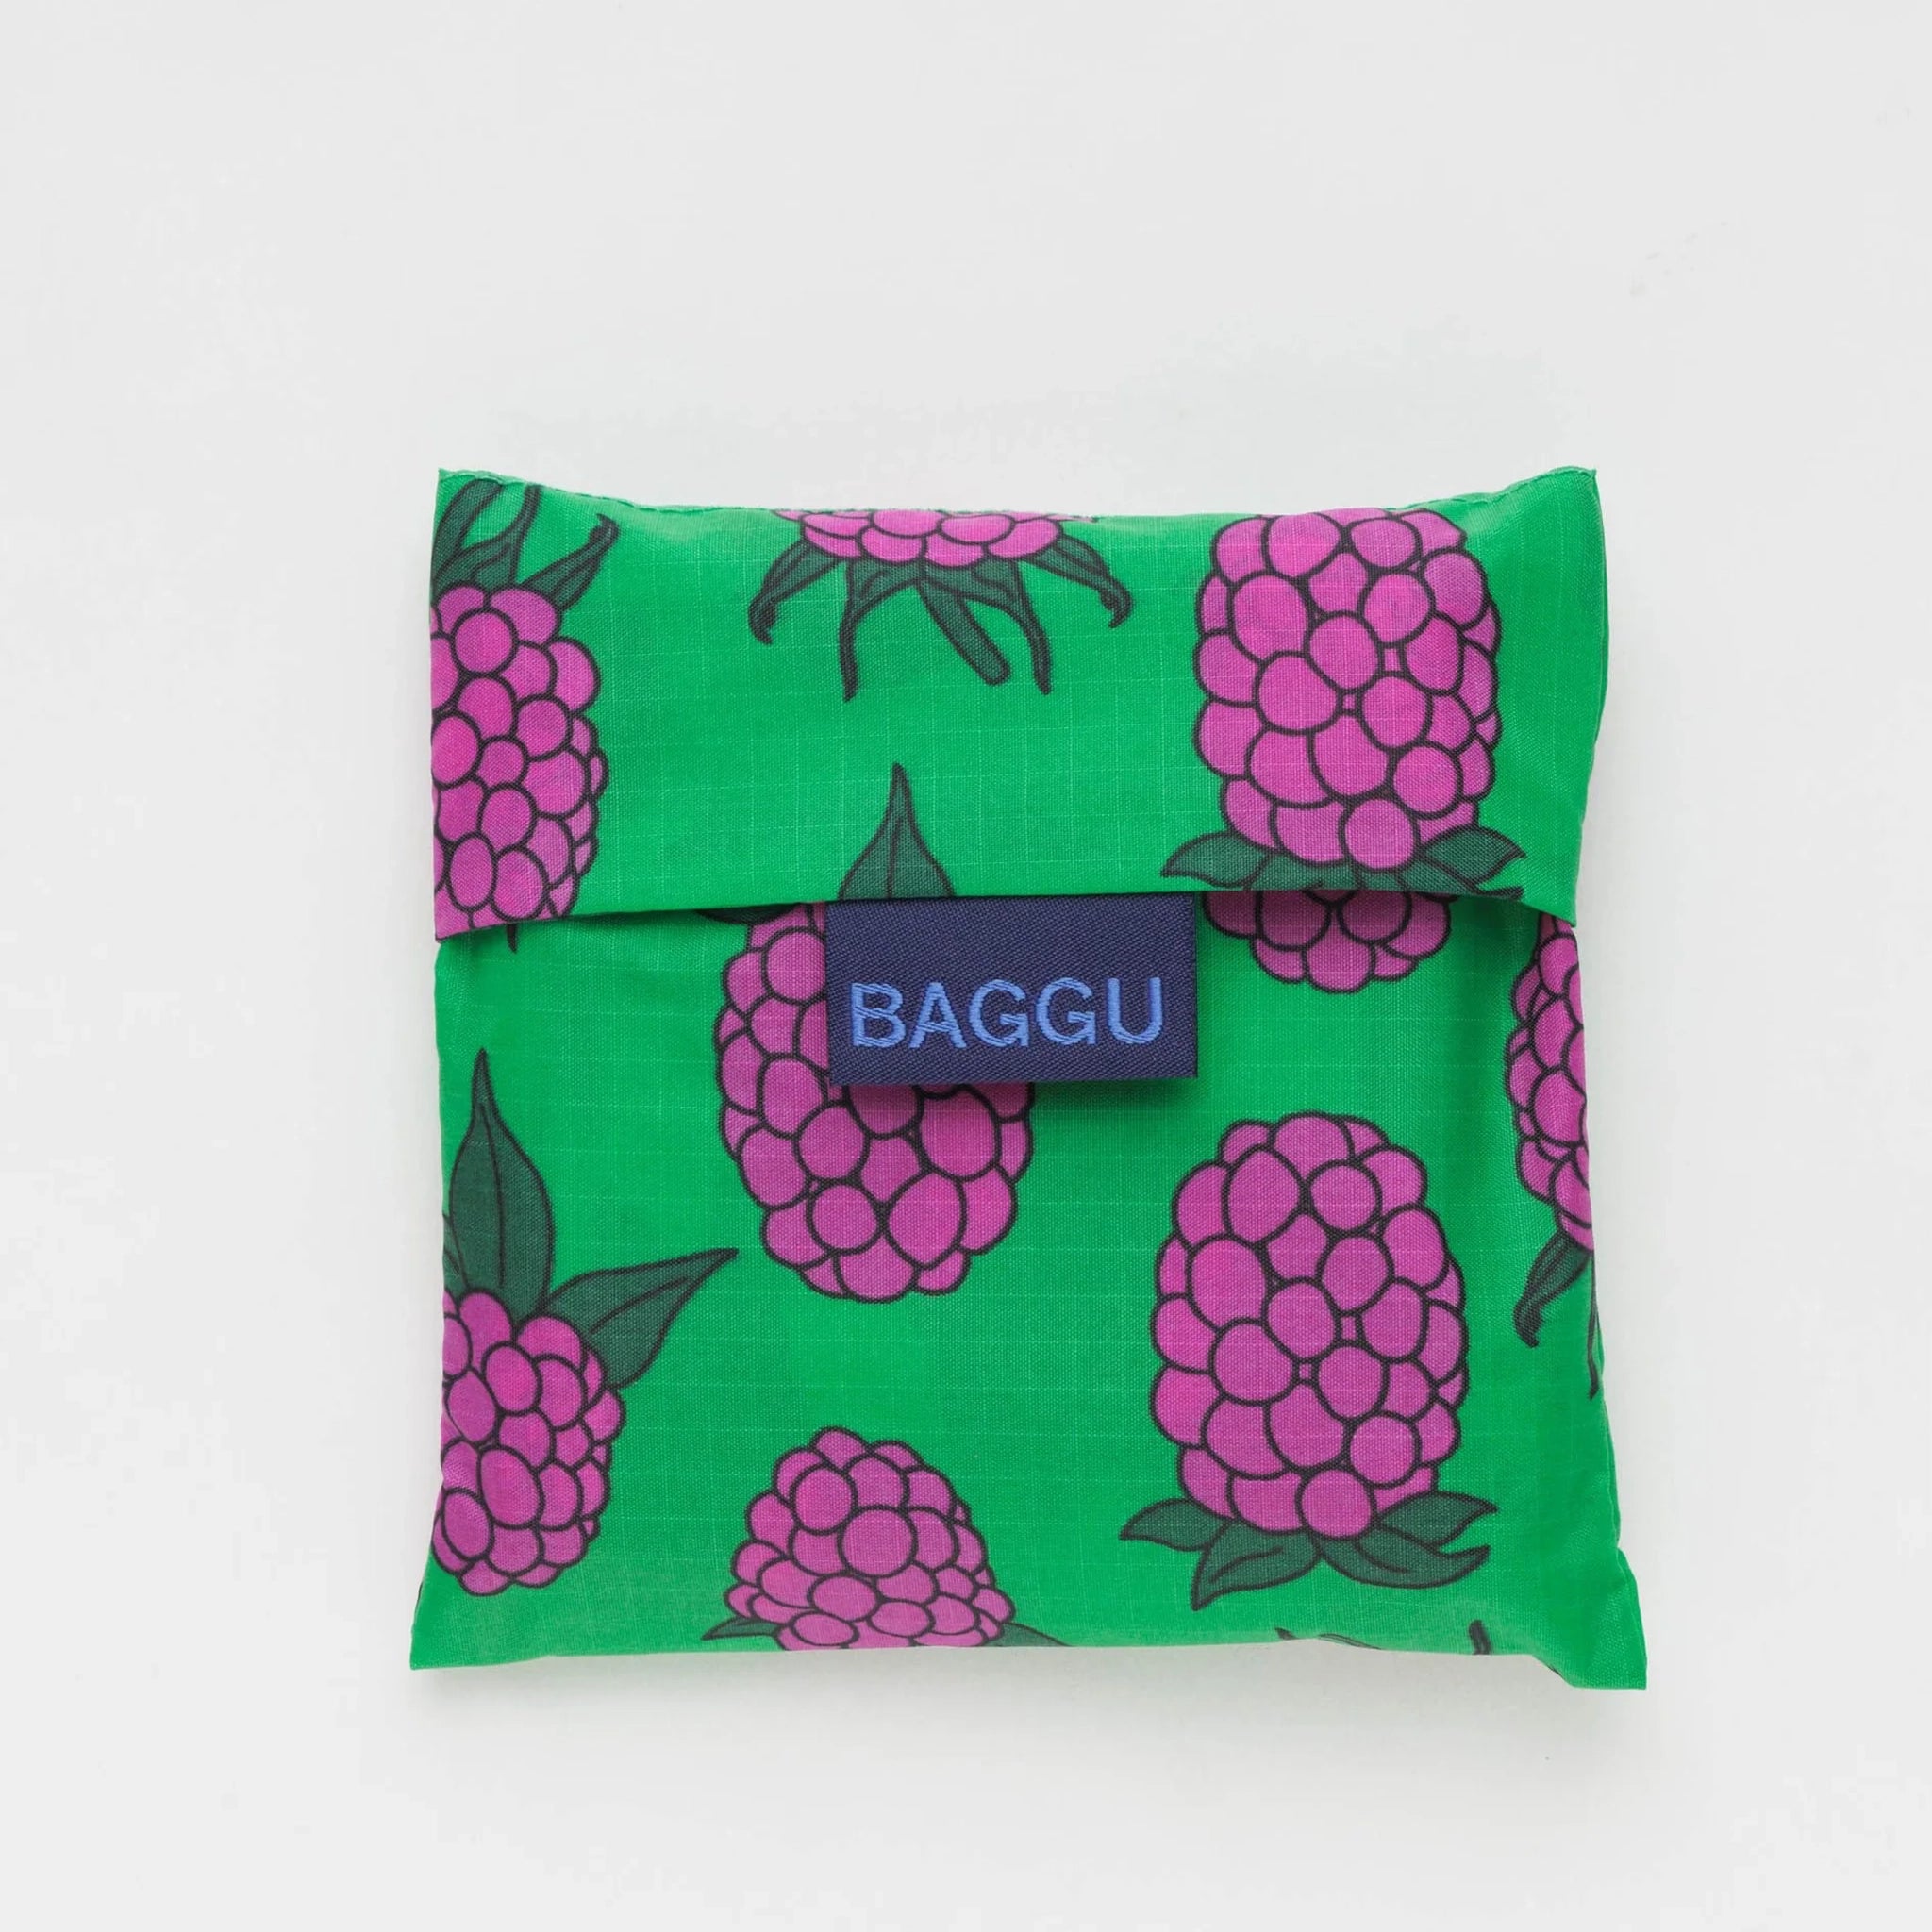 The same raspberry printed nylon bag folded up into a square pouch for easy traveling. 